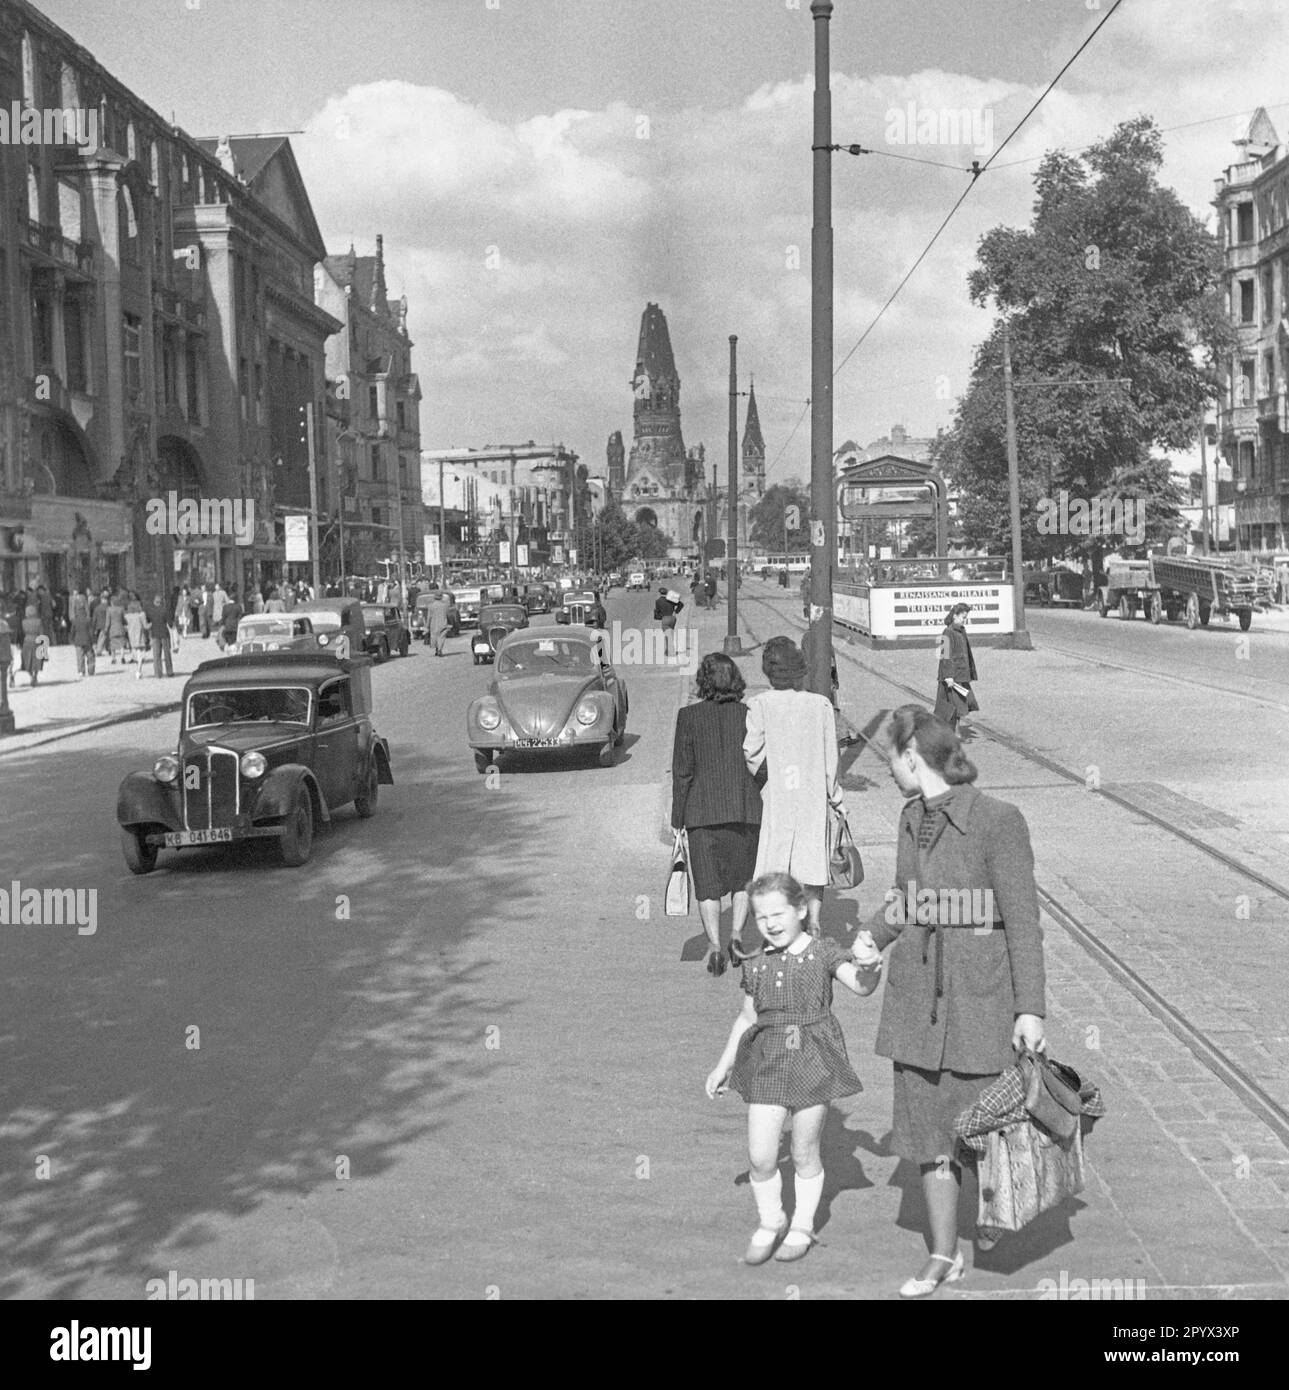 Undated photo of a street scene at the Kurfuerstendamm in West Berlin, British occupation zone, in the summer of 1950. In the foreground, pedestrians crossing the street. On the right, partially destroyed houses. In the background, the entrance to the underground station Kurfuerstendamm. Behind, the ruined tower of the Kaiser Wilhelm Memorial Church (Hollow Tooth). Stock Photo